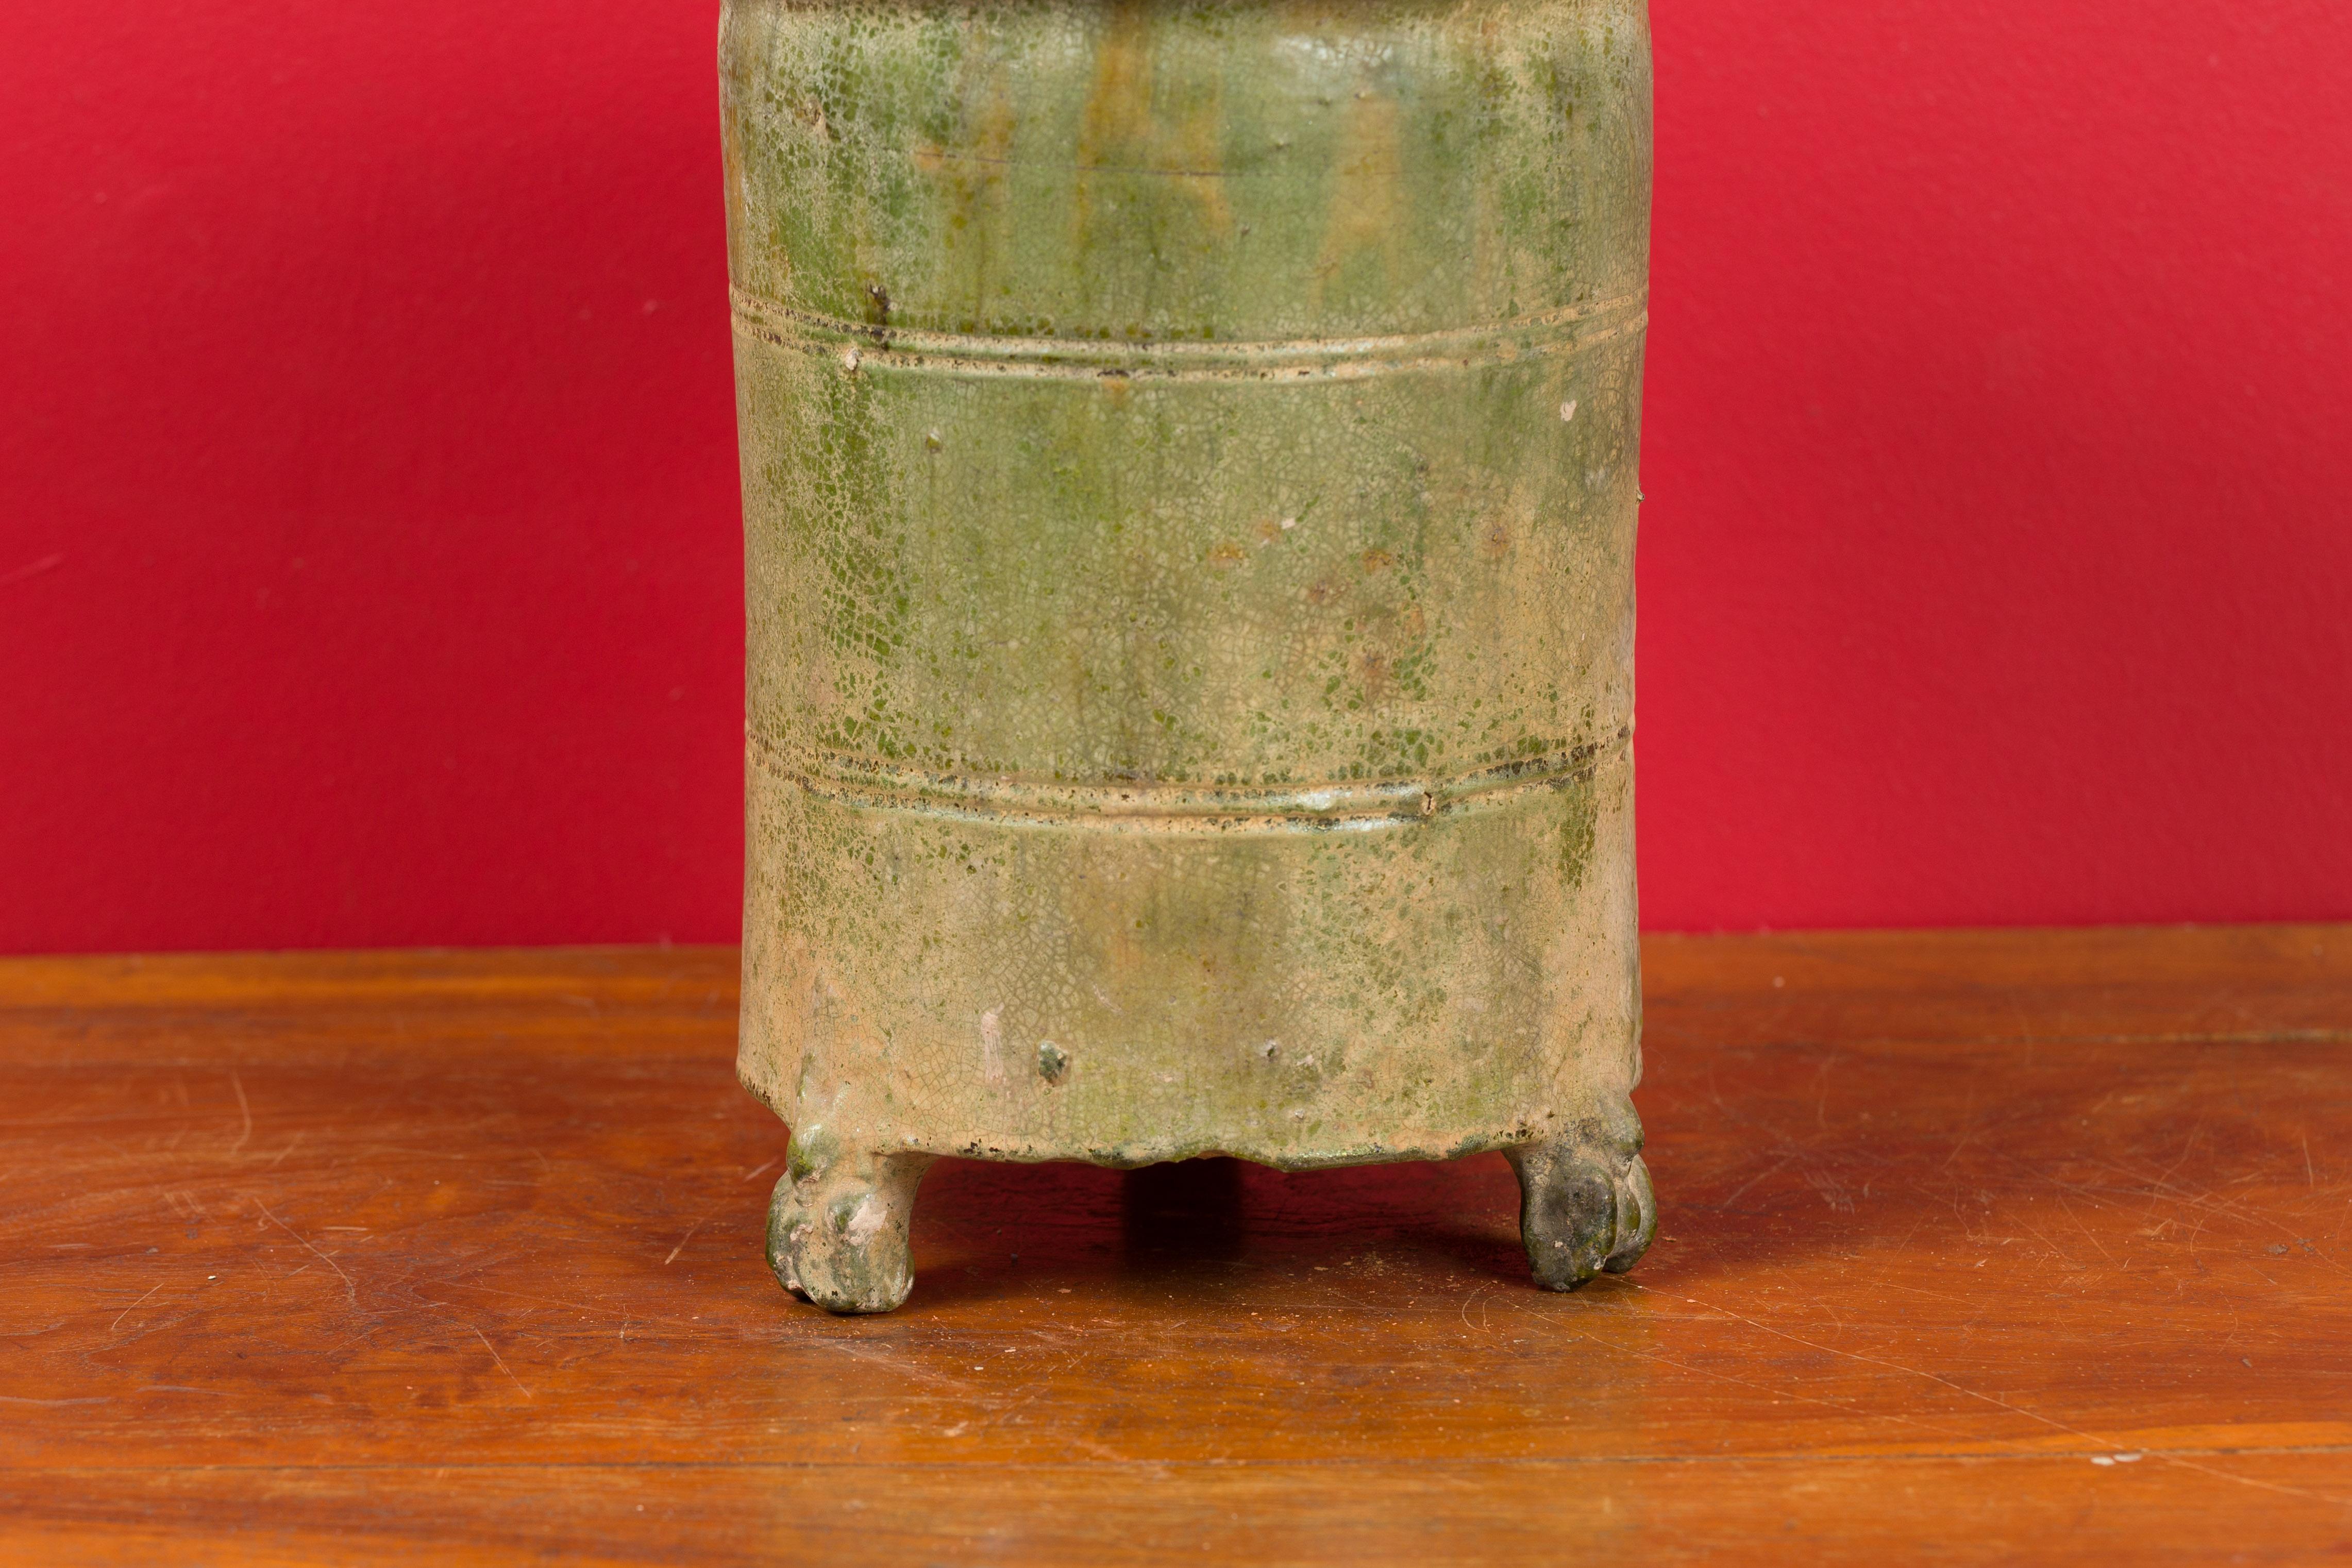 Petit Chinese Ming Dynasty 17th Century Terracotta Granary with Verdigris Patina For Sale 2